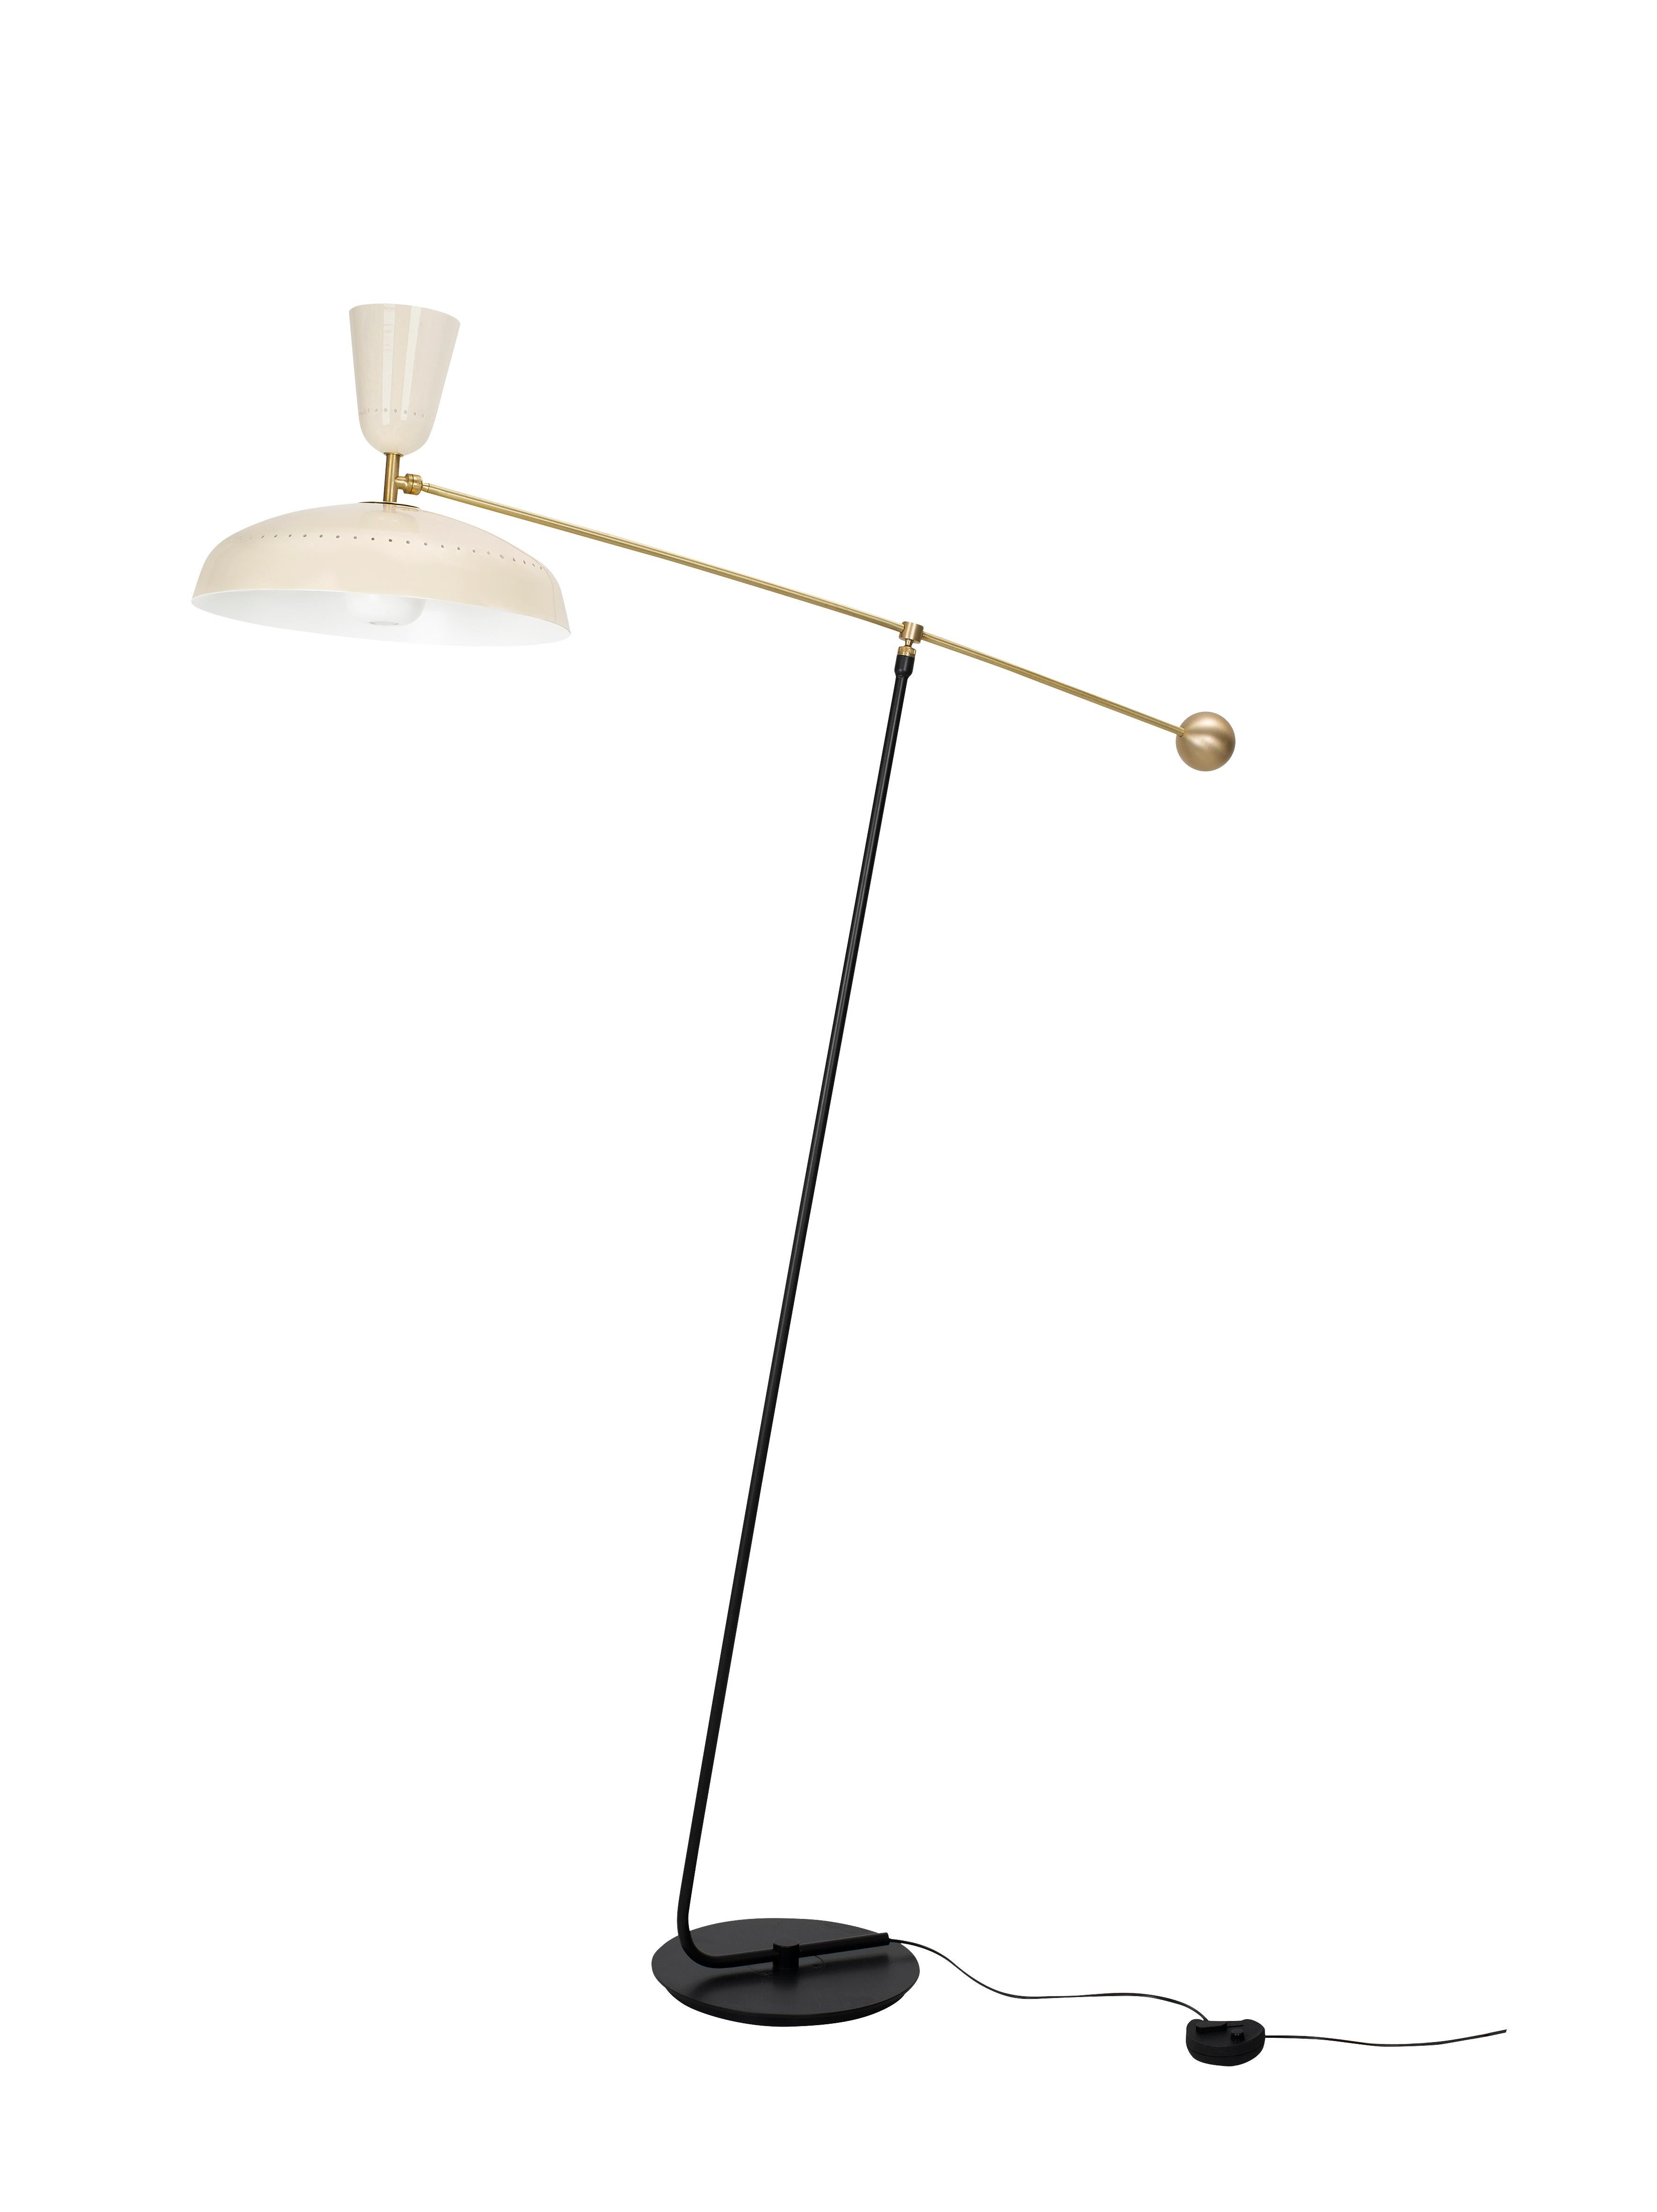 French Large Pierre Guariche 'G1' Floor Lamp for Sammode Studio in Chalk For Sale